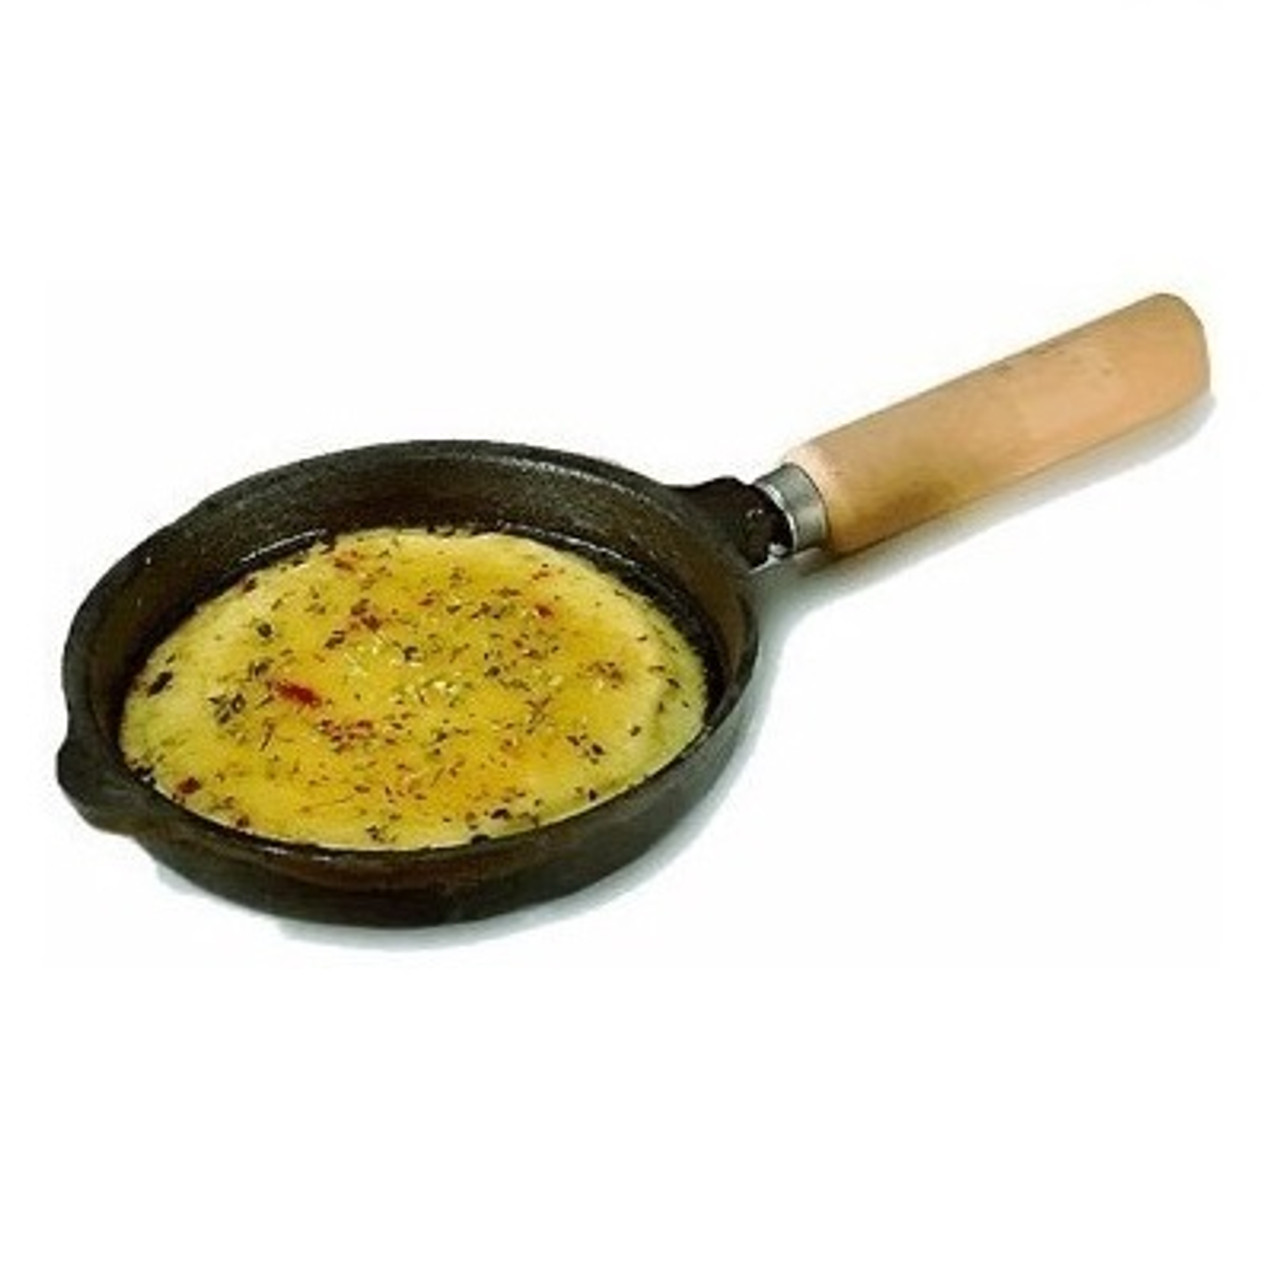 Provoletera Sin Enlozar 15 Bocados Cast Iron Grill Pan for Provolone  Cheese. up to 15 bites